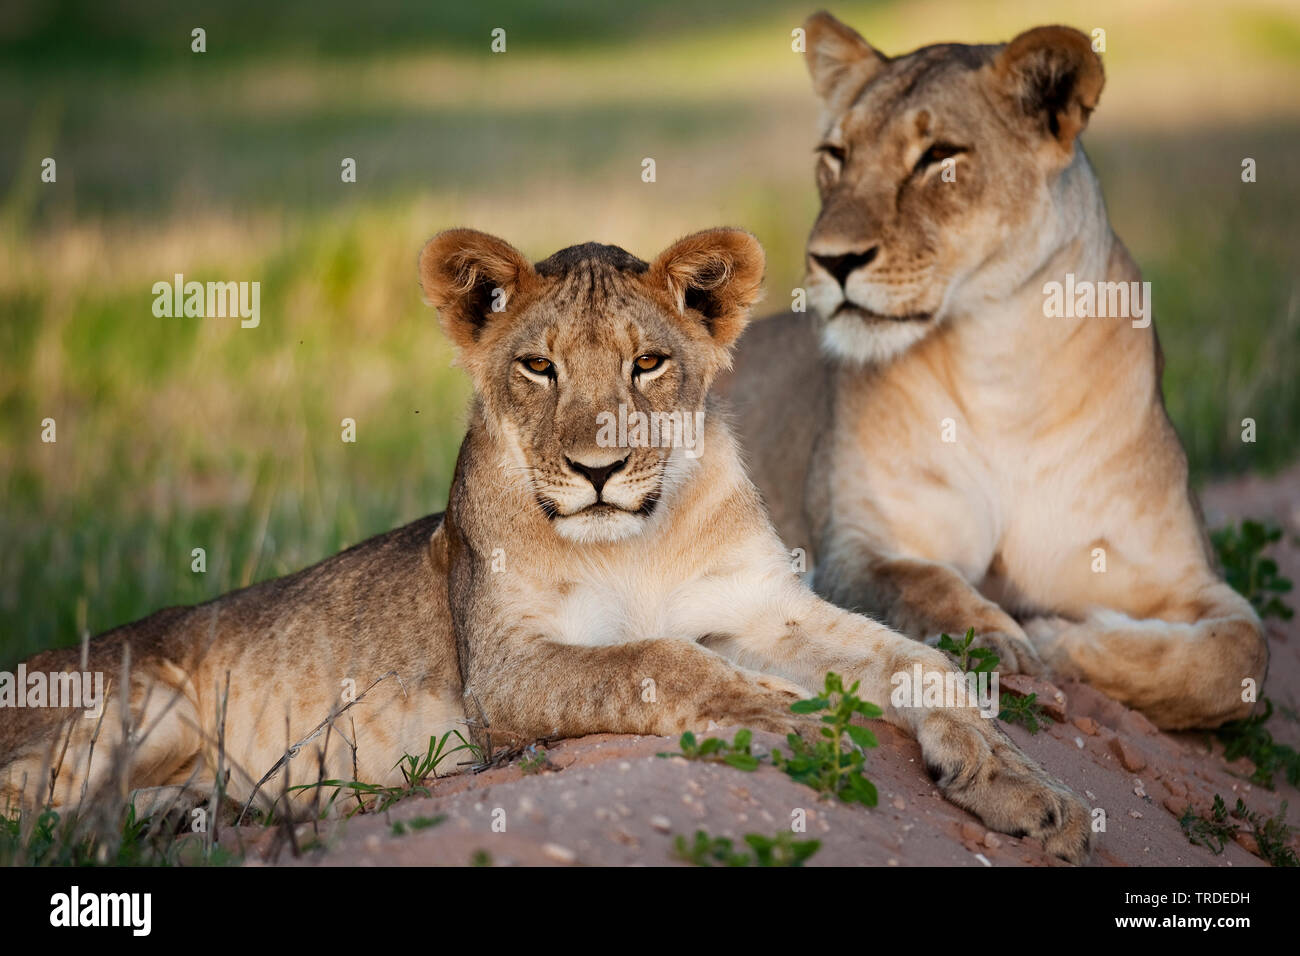 lion (Panthera leo), resting lioness with young animal, South Africa Stock Photo